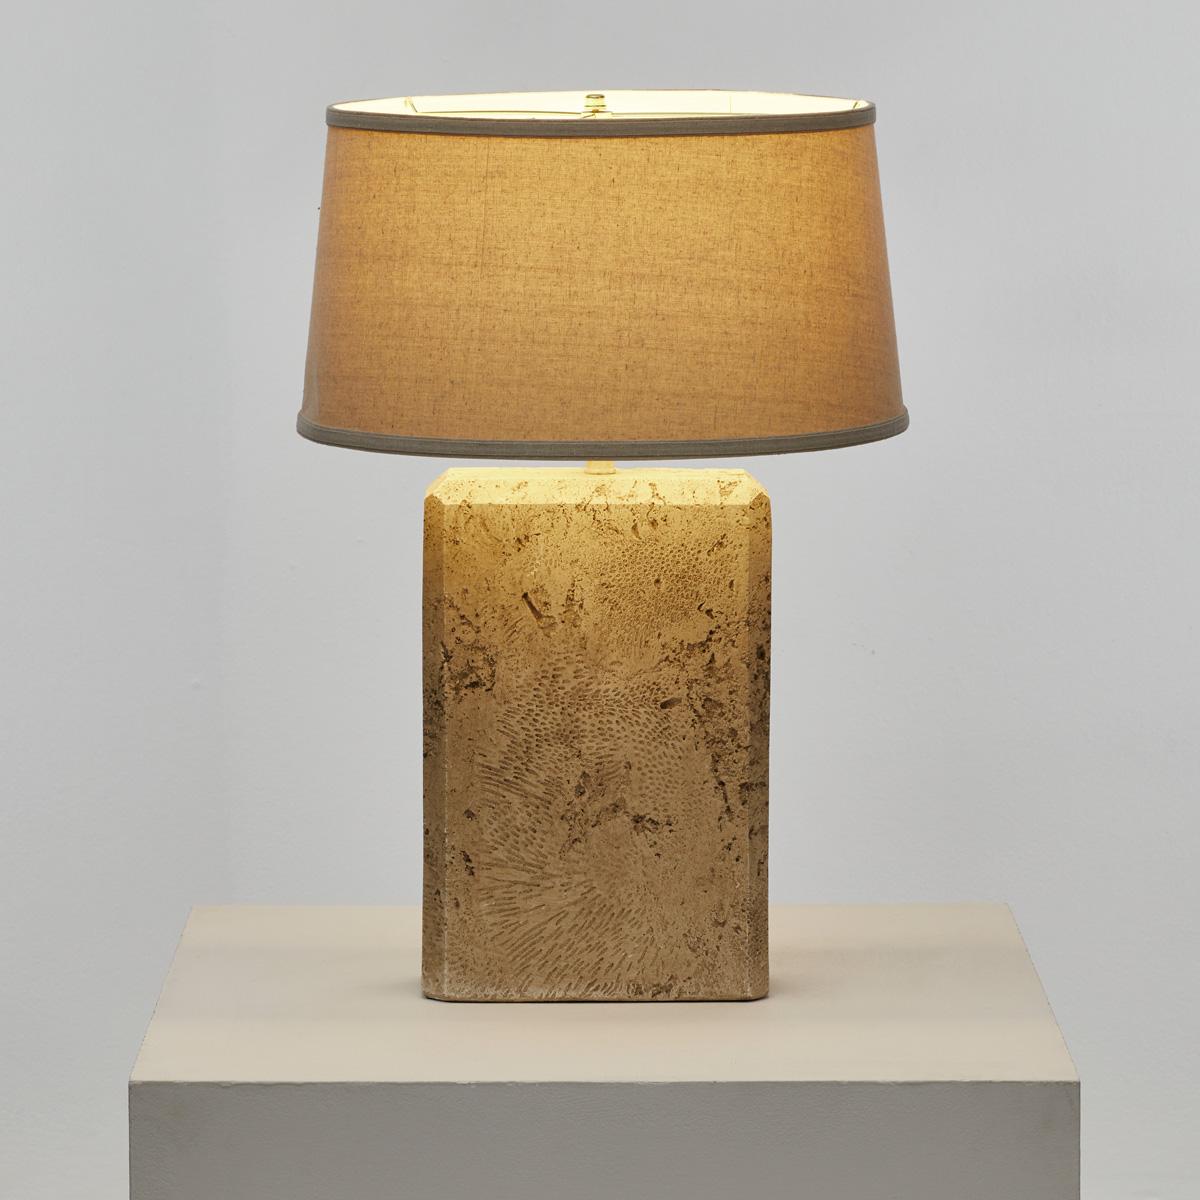 A travertine effect/composite table lamp with a shallow tapered drum shade in linen.

The base, which is not solid travertine, shows signs of wear, with some minor chips to the corners. The shade is in good used condition.